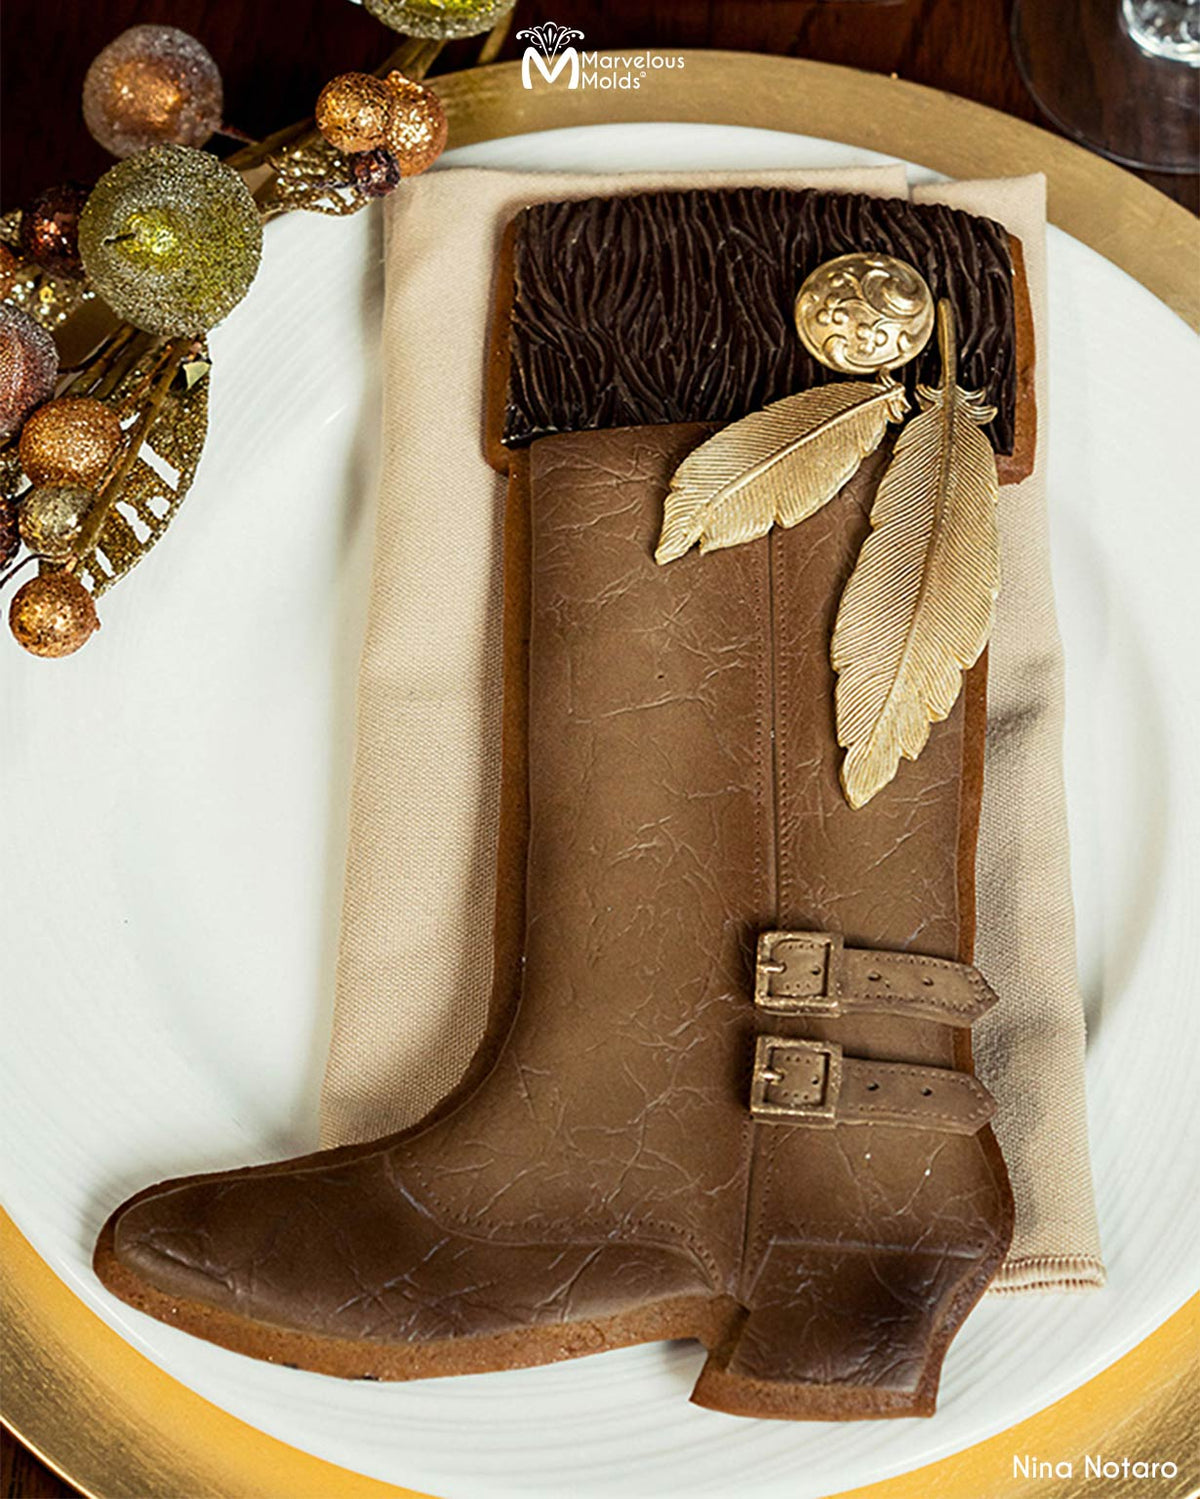 Riding Shoe Cake Decorated with Marvelous Molds Large Feather 2 Part Silicone Mold